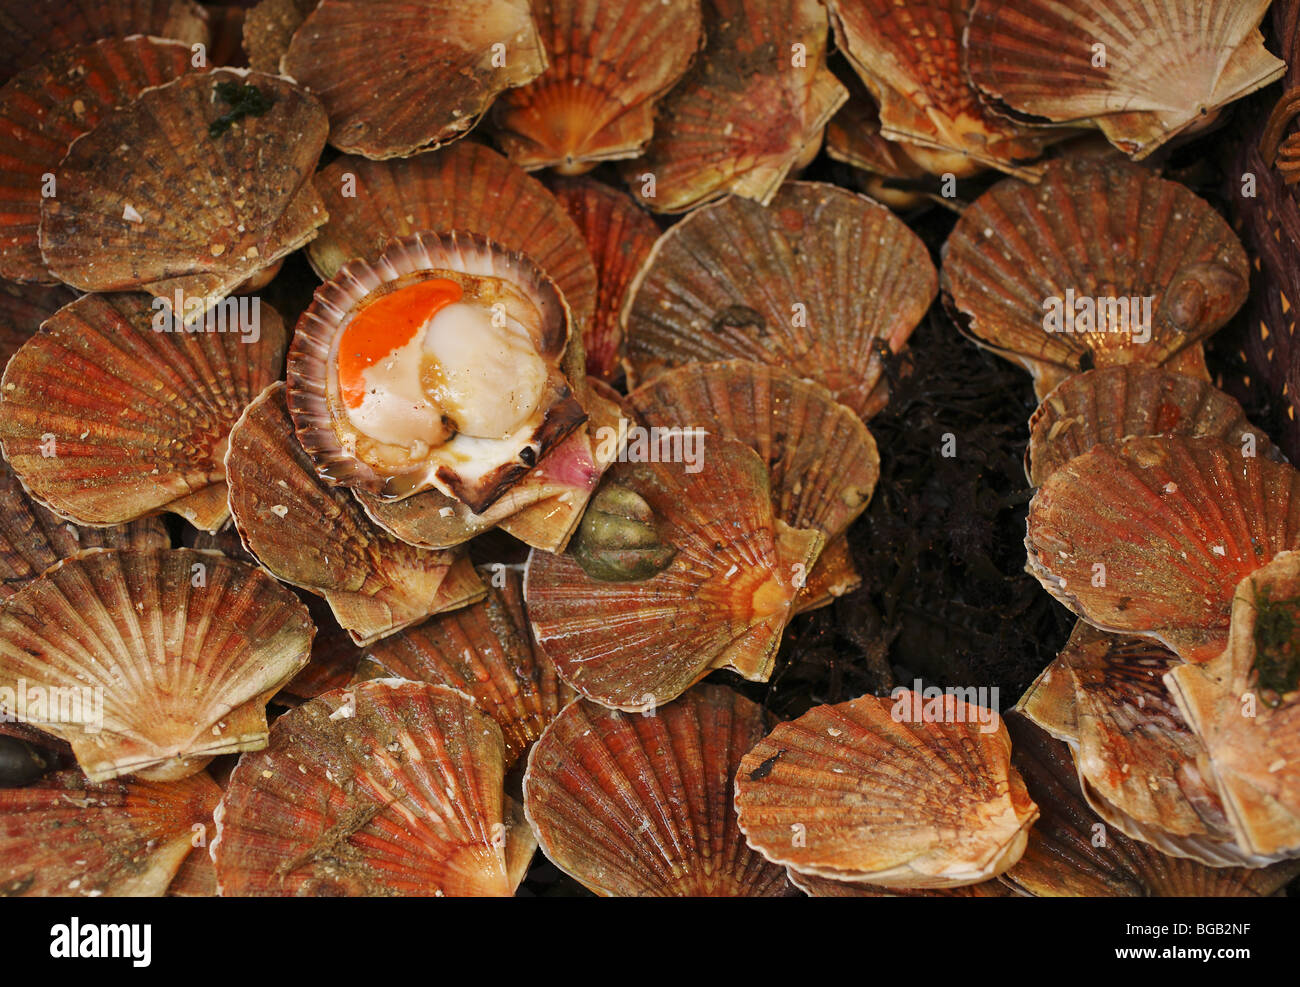 Shell fish on sale, market in Paris, France Stock Photo